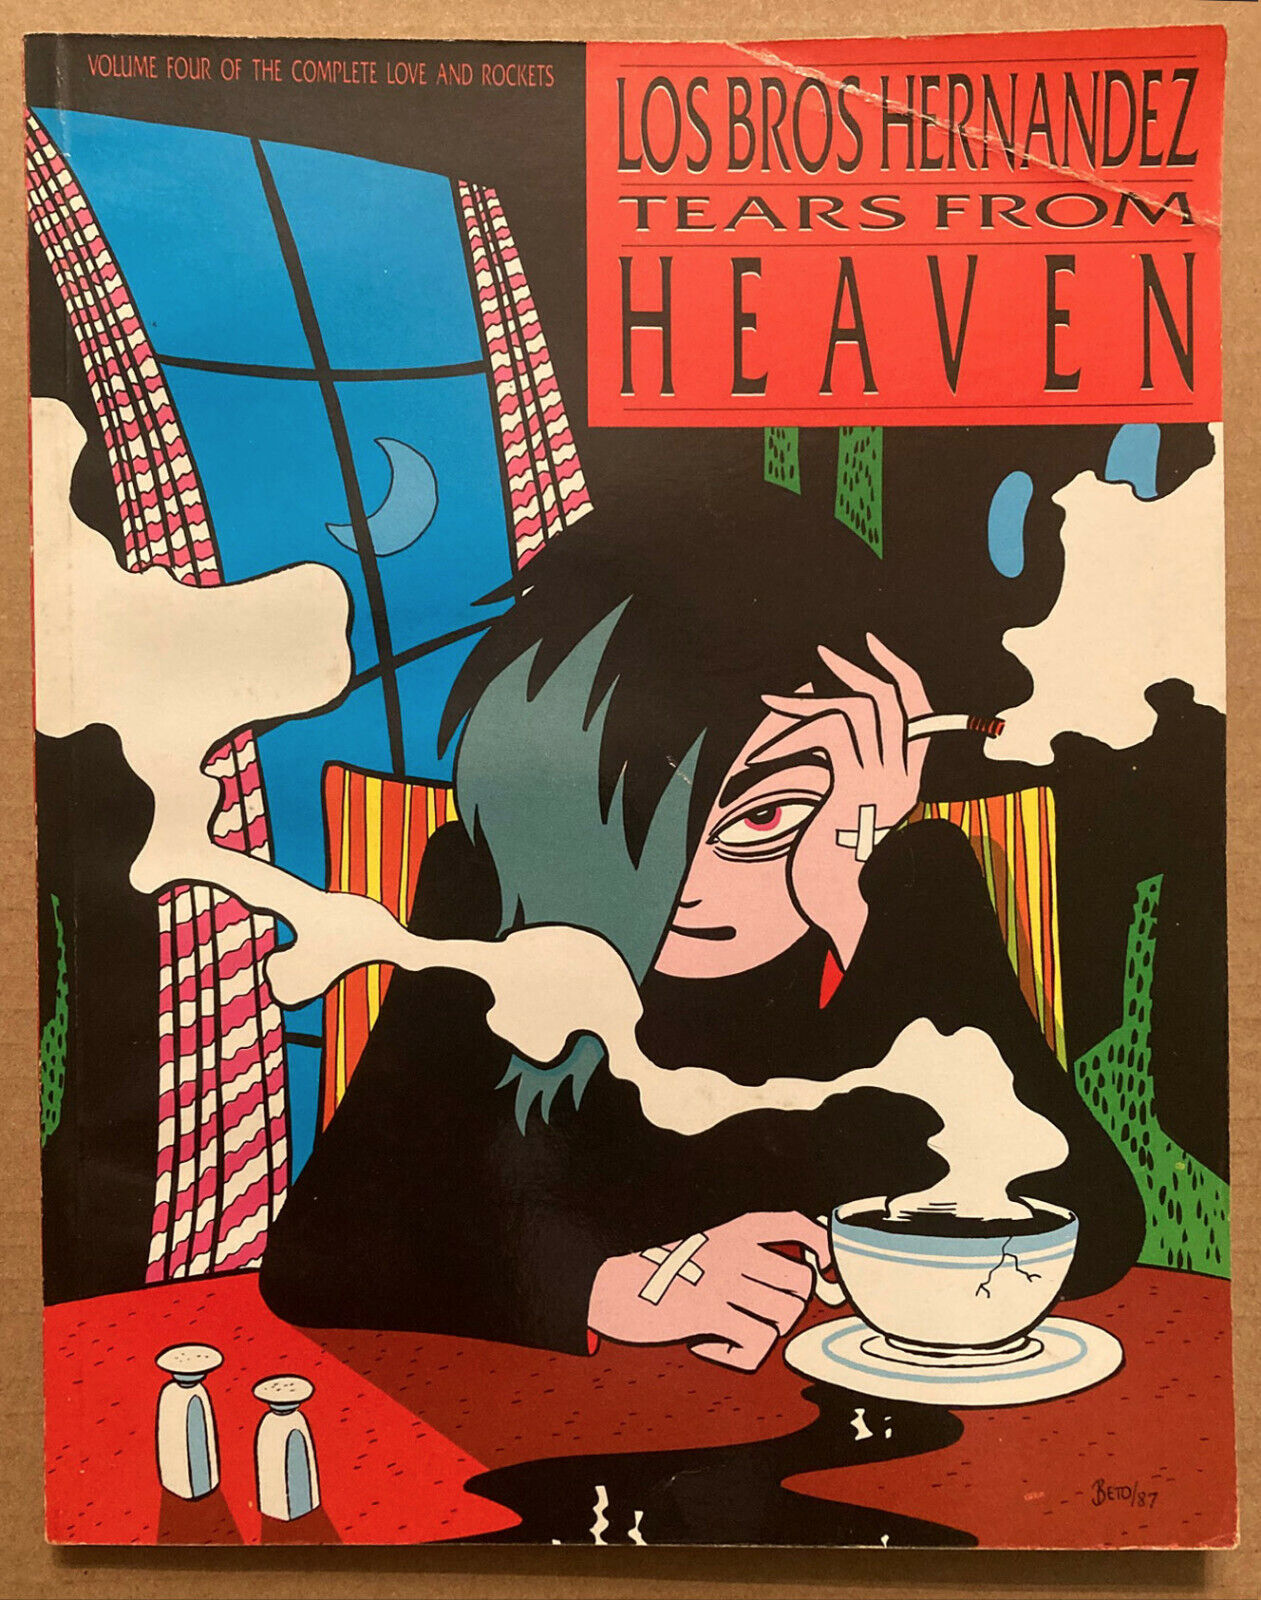 TEARS FROM HEAVEN Hernandez. Fantagraphics 1st Ed. 1988. Love and Rockets.